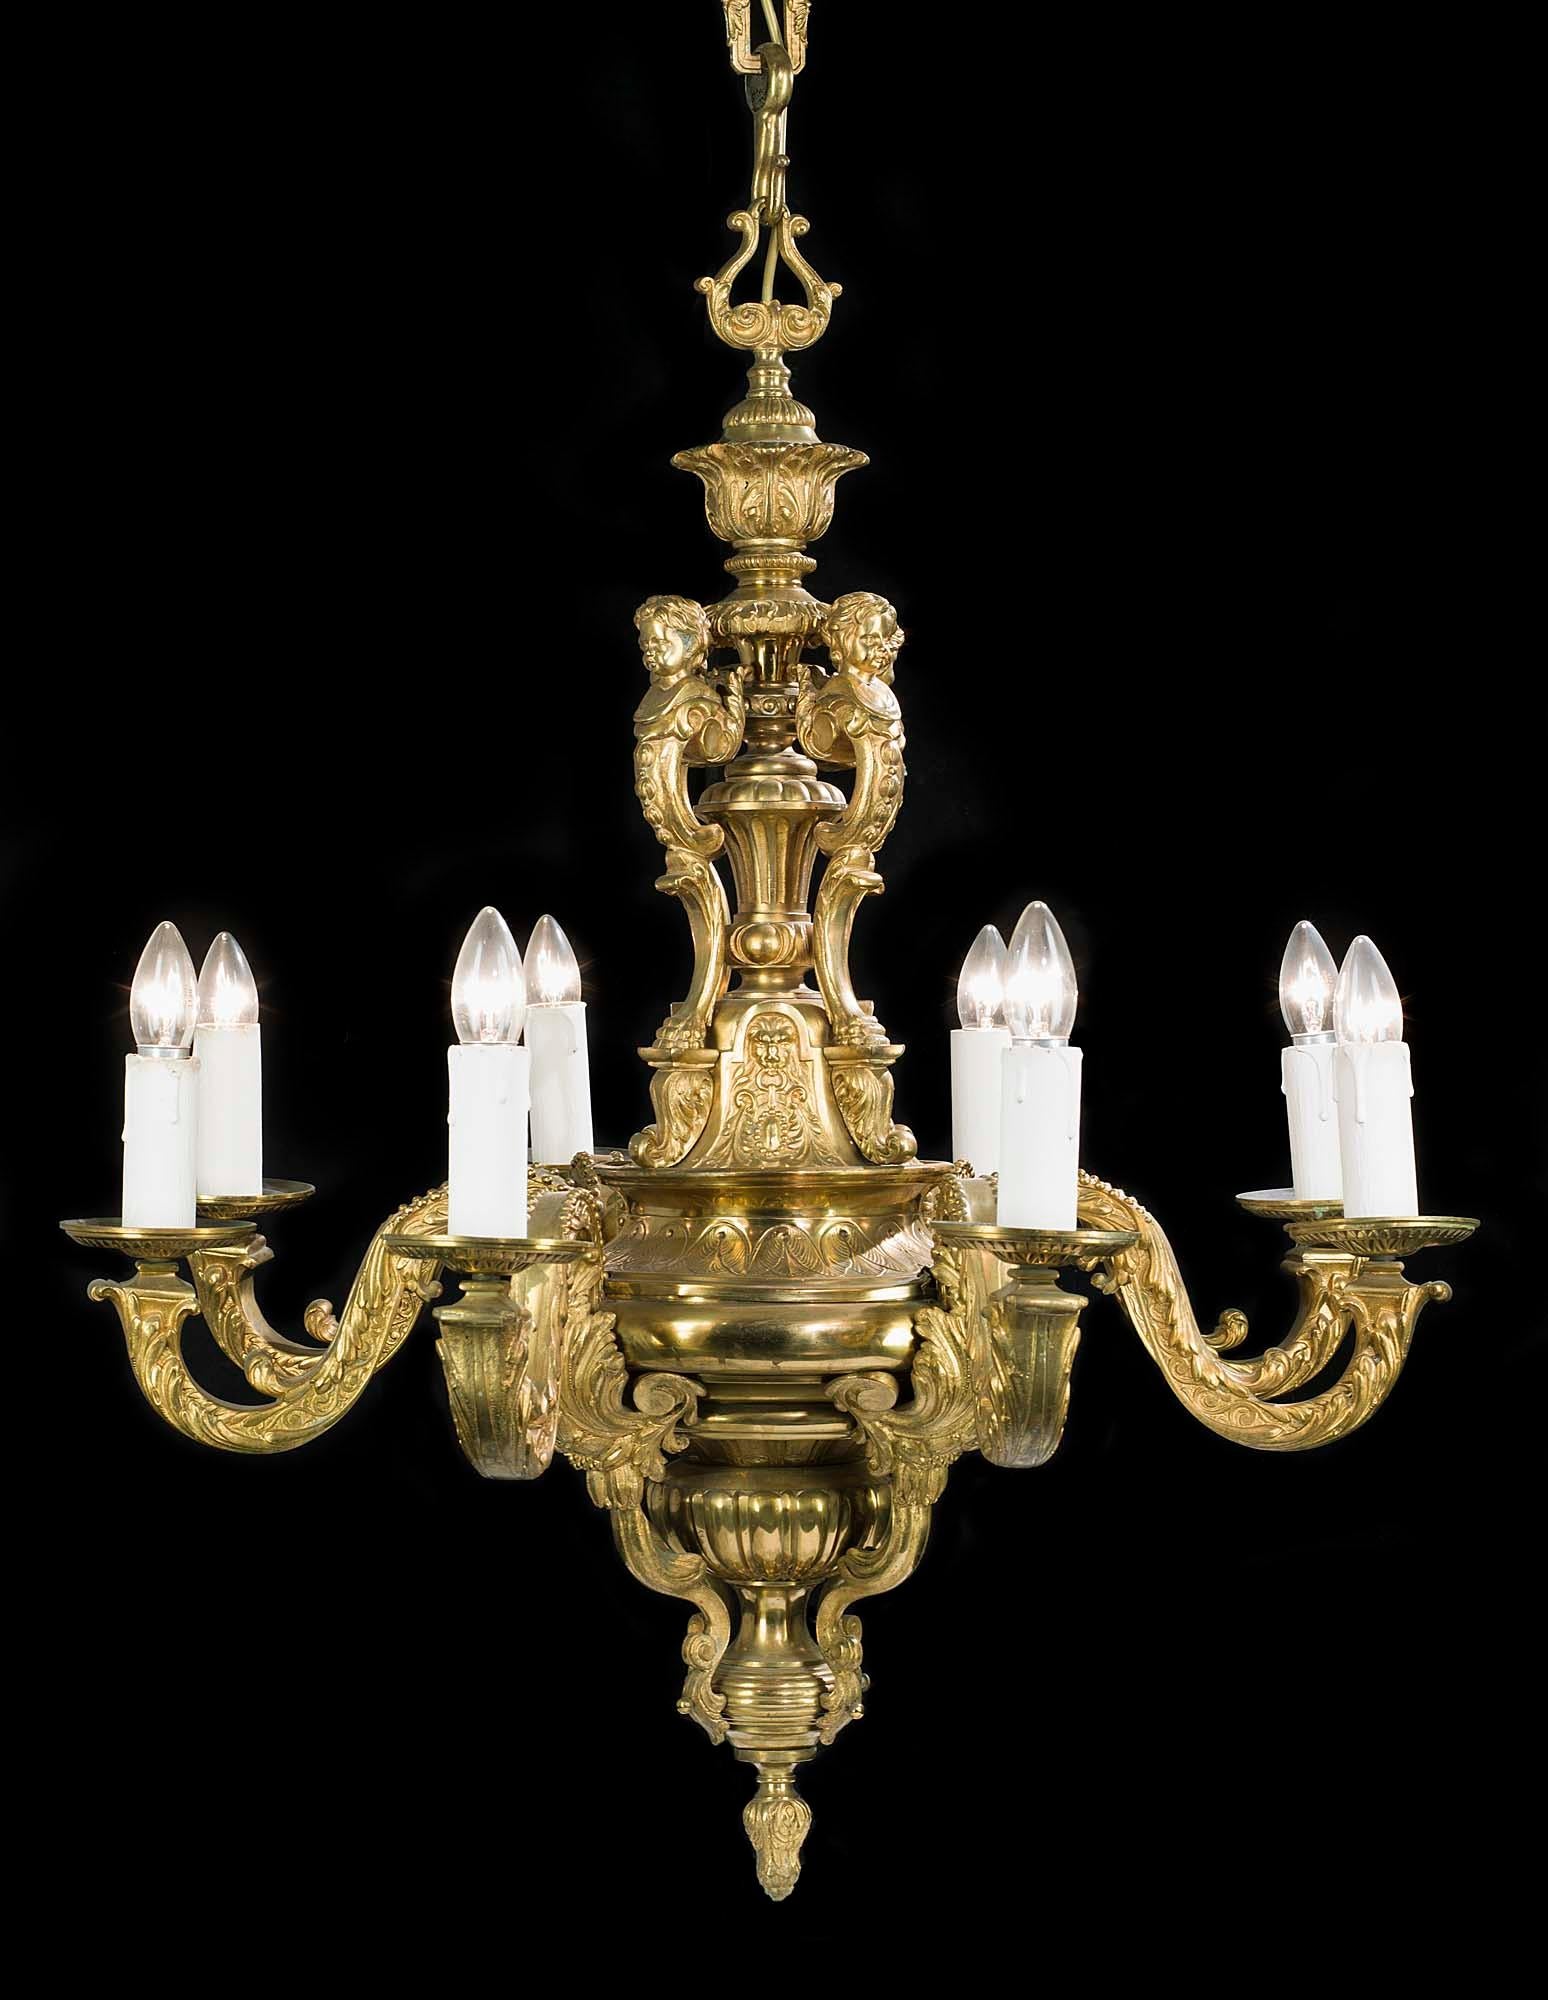 A large and heavy eight branch Victorian Baroque style brass antique chandelier held by a decorative chain linked to the brass ceiling rose. The ornate central stem, descending from a foliate urn, is surmounted by four cherubic terms. The eight